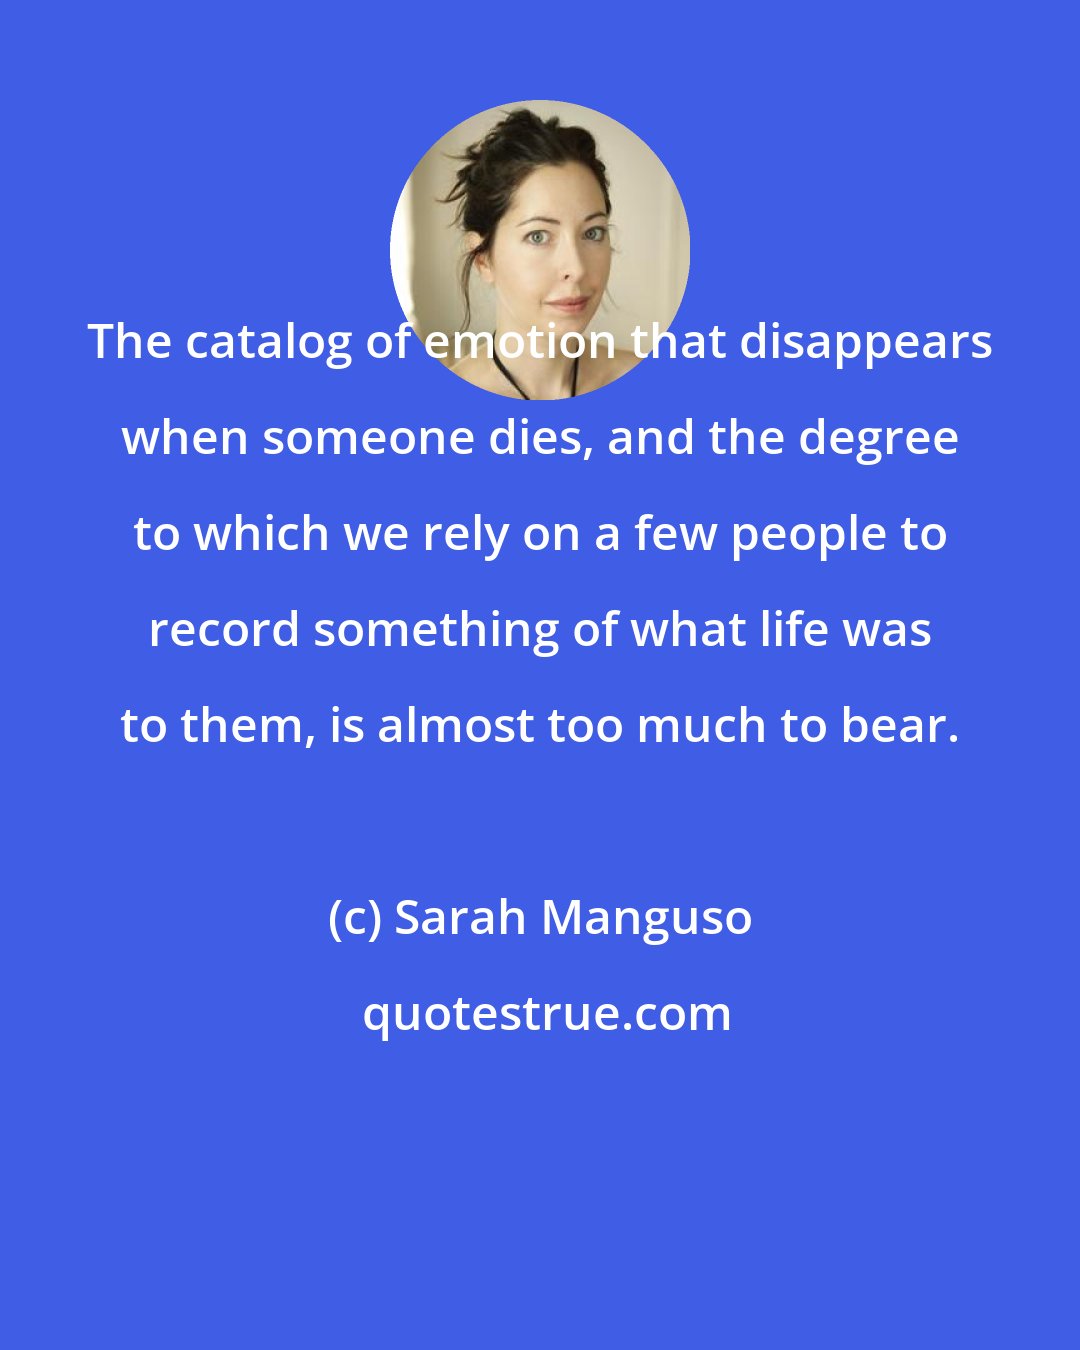 Sarah Manguso: The catalog of emotion that disappears when someone dies, and the degree to which we rely on a few people to record something of what life was to them, is almost too much to bear.